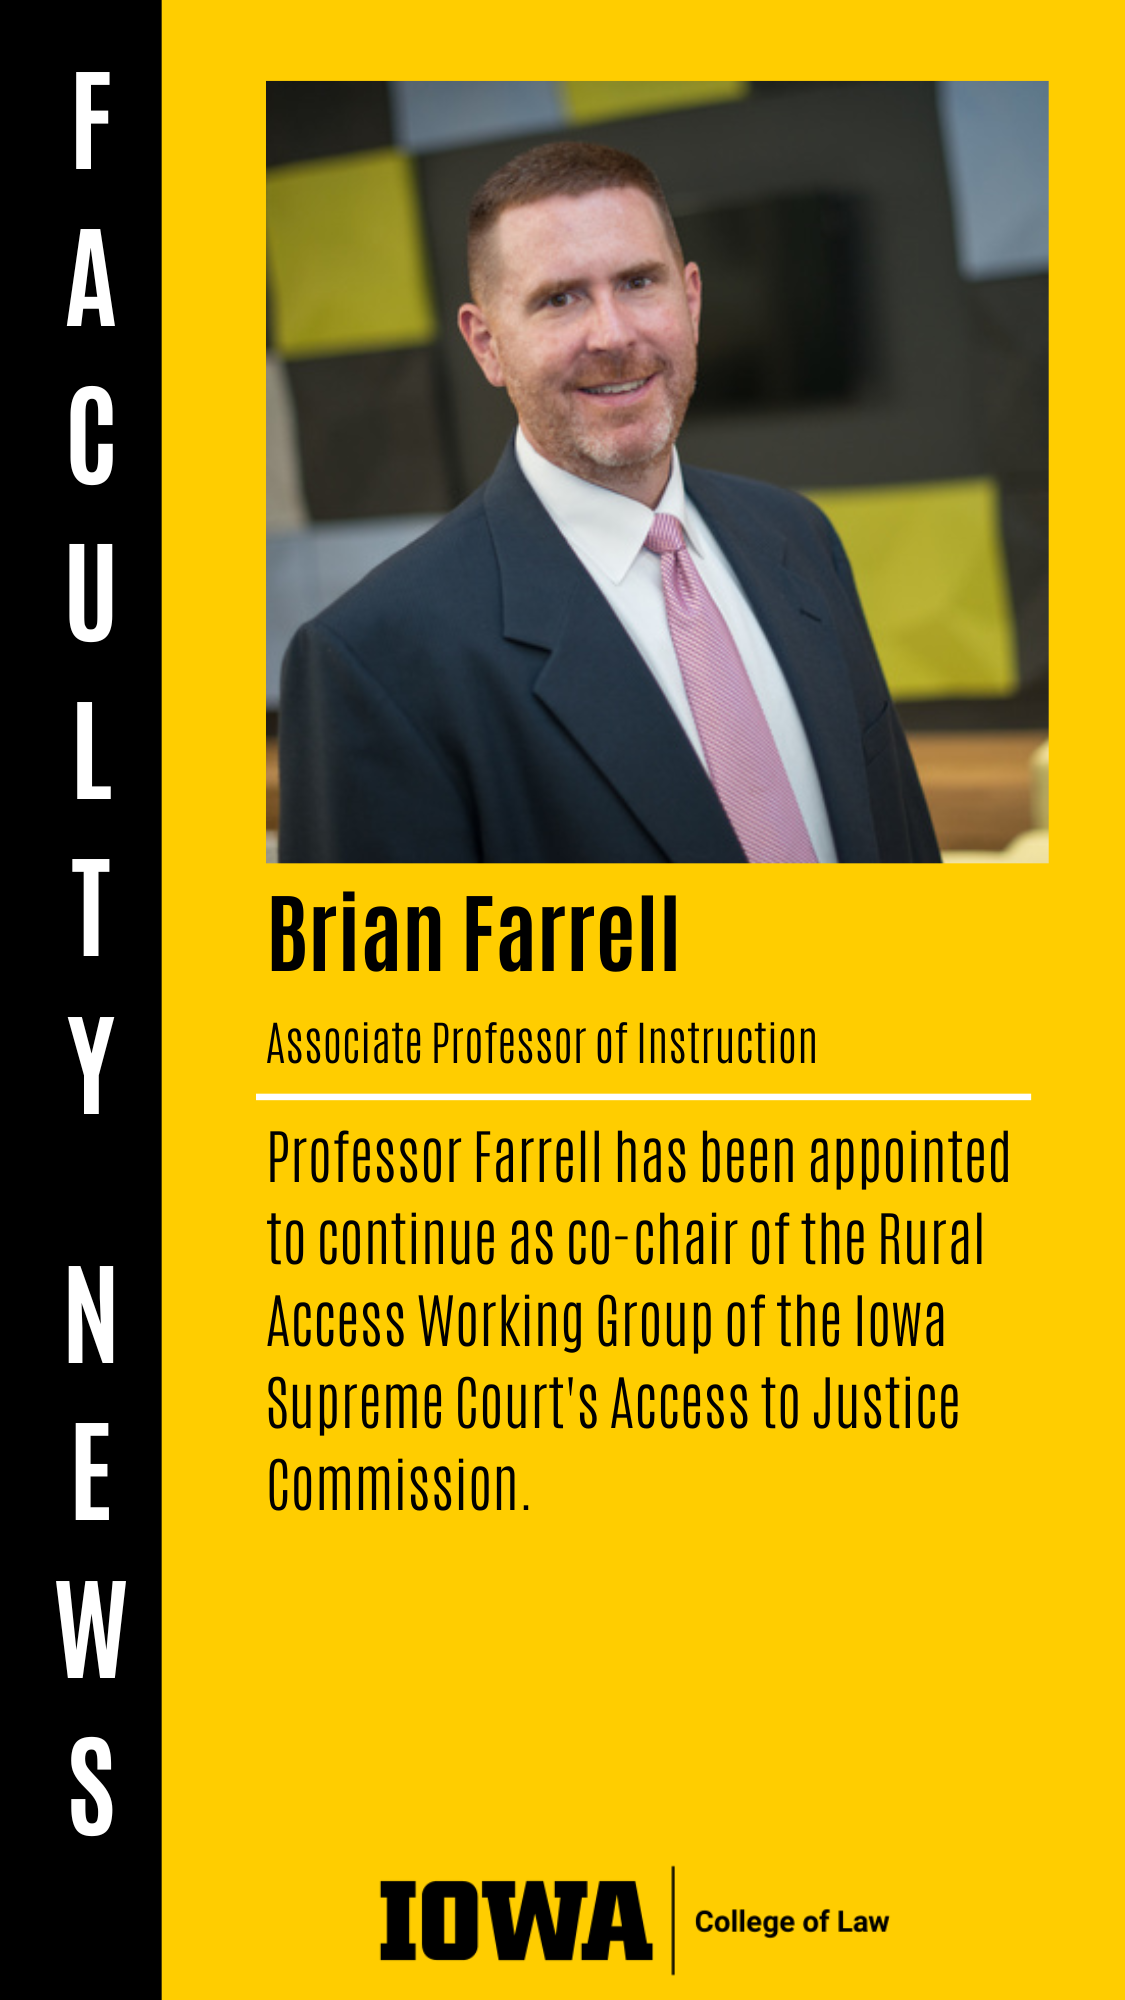 Associate Professor of Instruction Professor Farrell has been appointed to continue as co-chair of the Rural Access Working Group of the Iowa Supreme Court's Access to Justice Commission. Brian Farrell